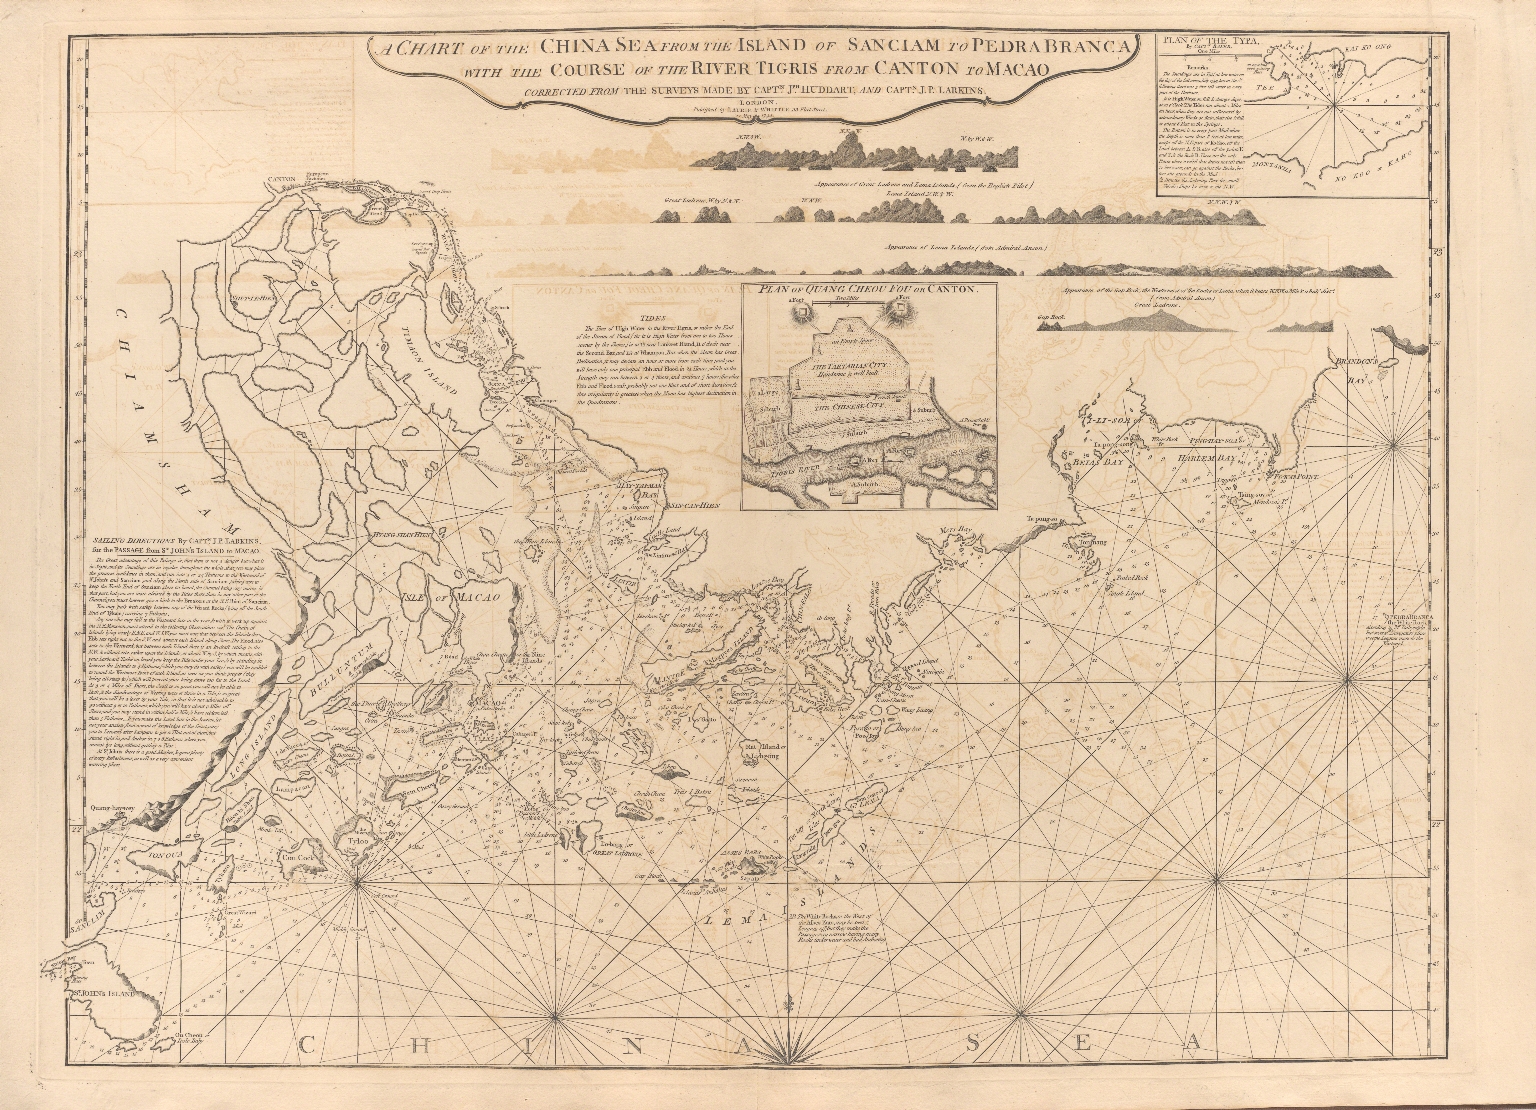 A chart of the China Sea from the Island of Sanciam to Pedra Branca with the course of the River Tigris from Canton to Macao